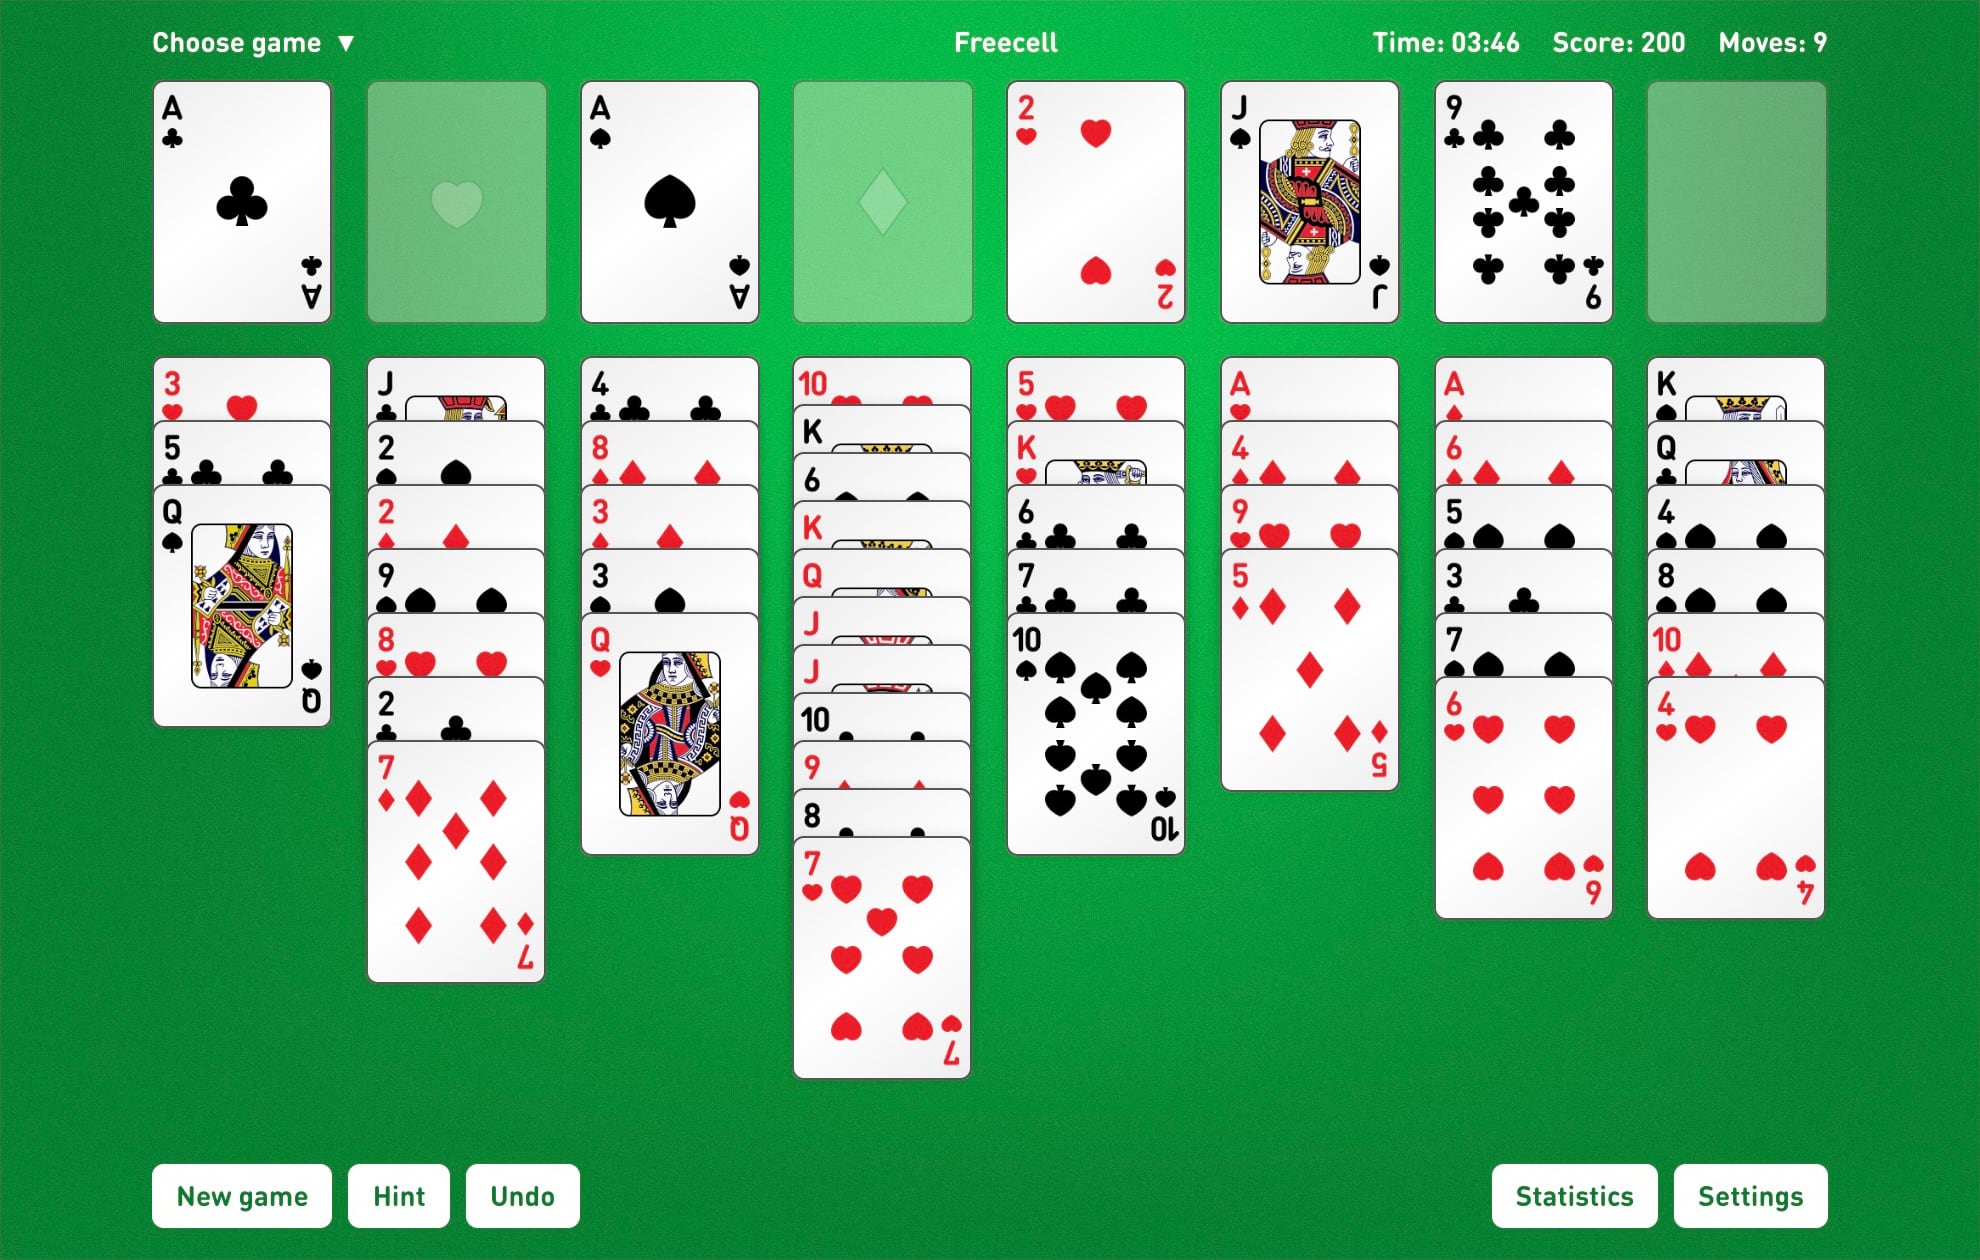 Themed solitaire games